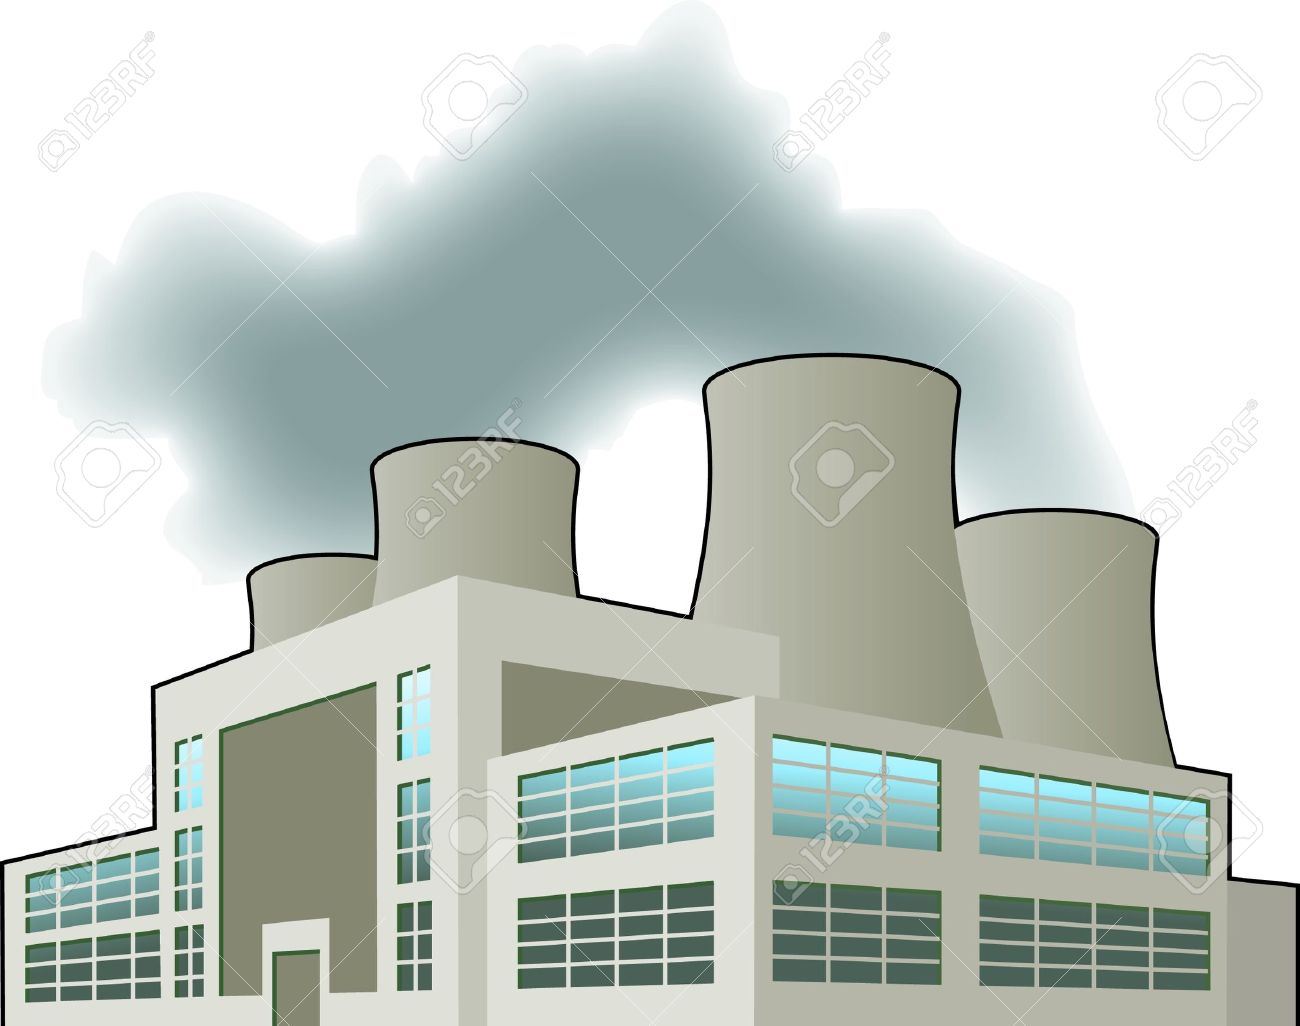 clipart power station - photo #7